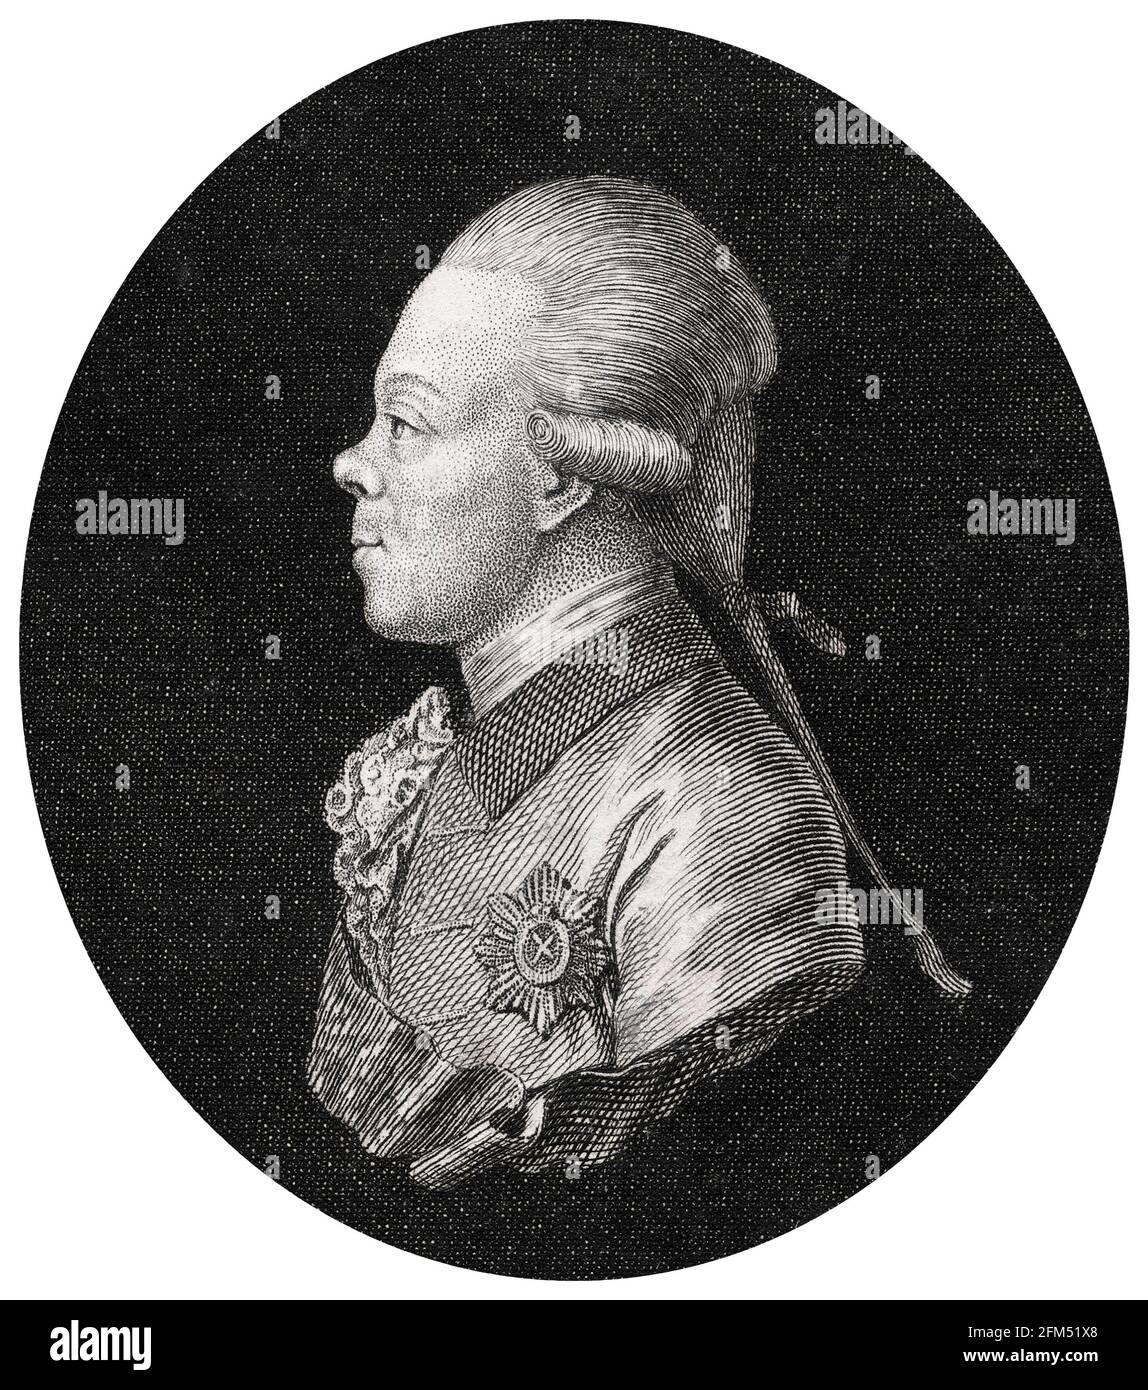 Paul I (1754-1801), Emperor of Russia (1796-1801), portrait engraving by JE Mansfield, 1775-1825 Stock Photo